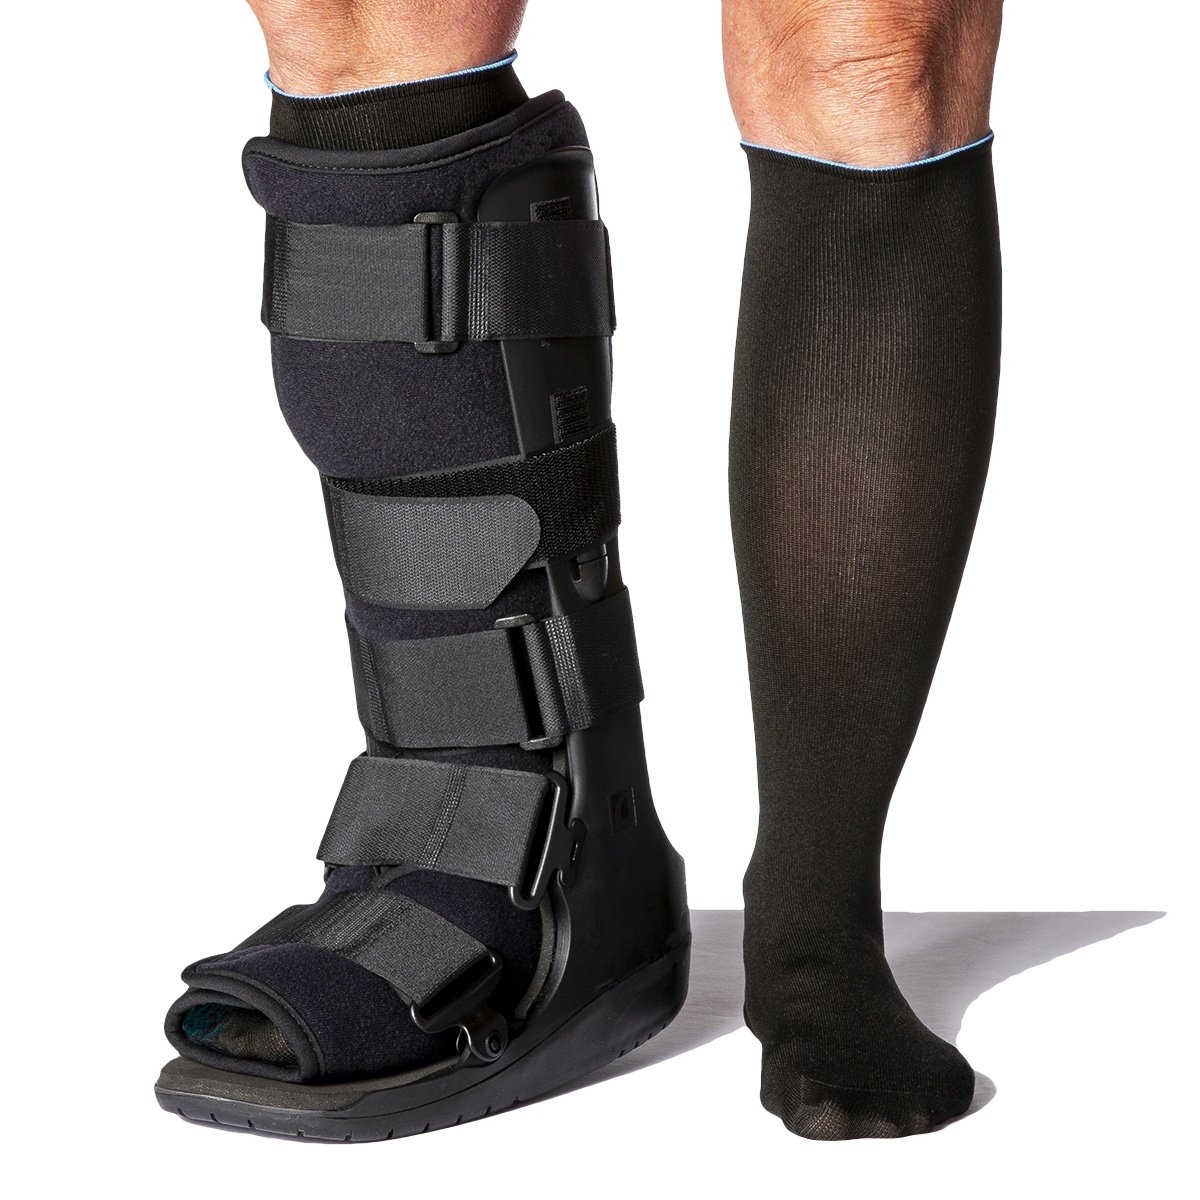 Walker Boot Socks ideal for use with almost every type of walker boot – Limb Keepers